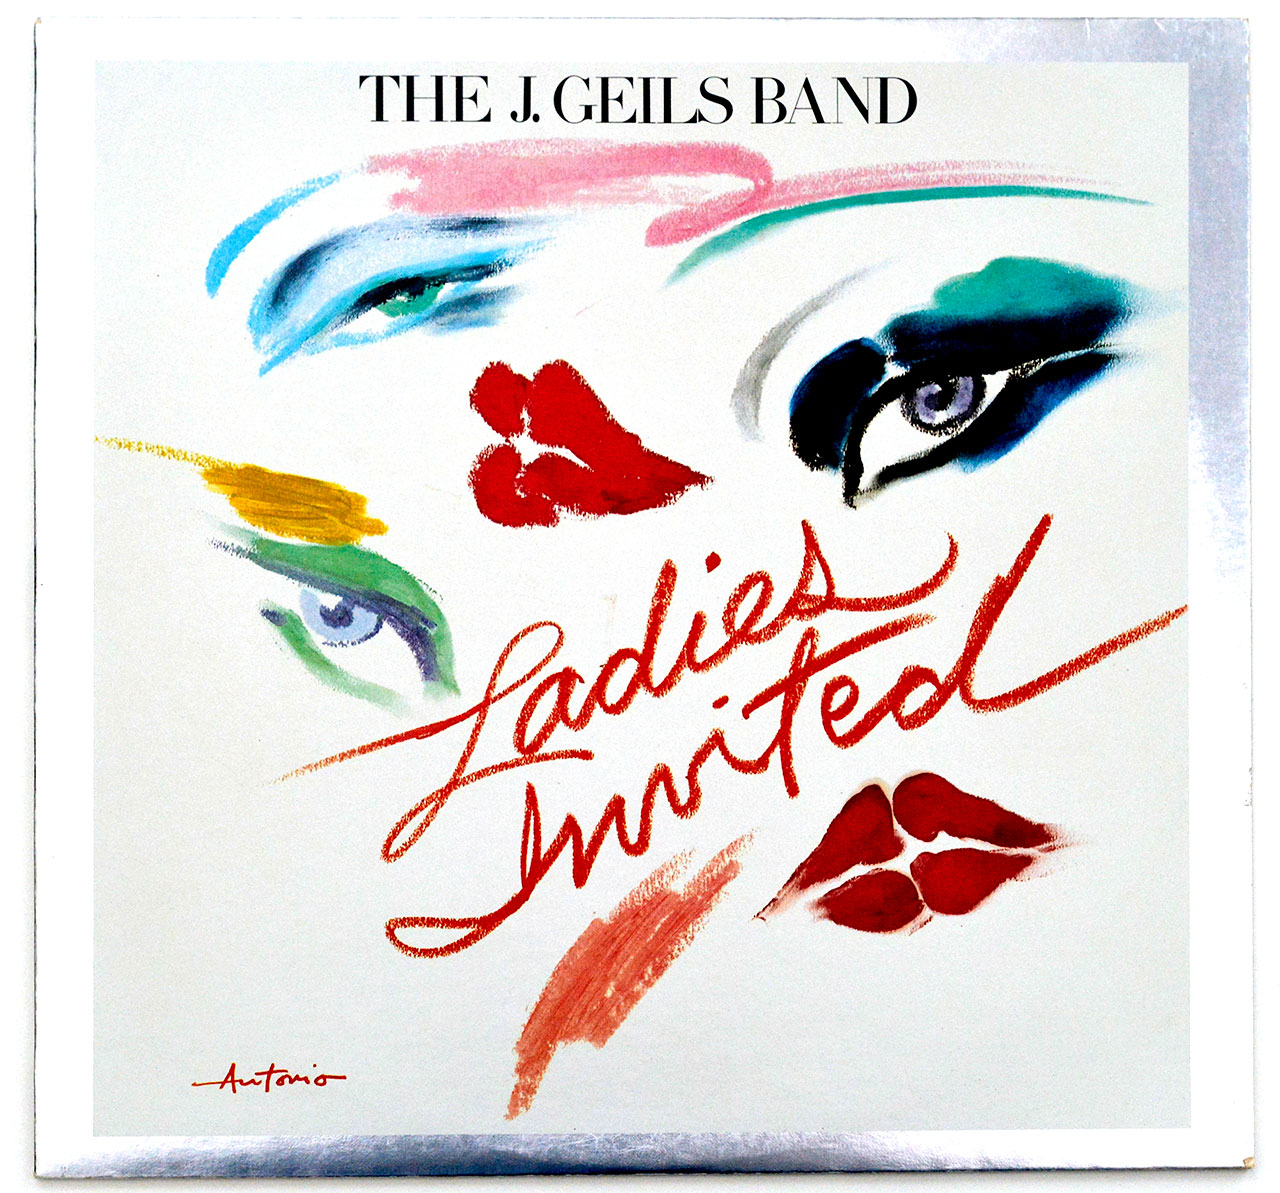 Album Front Cover Photo of THE J. GEILS BAND – Ladies Invited 